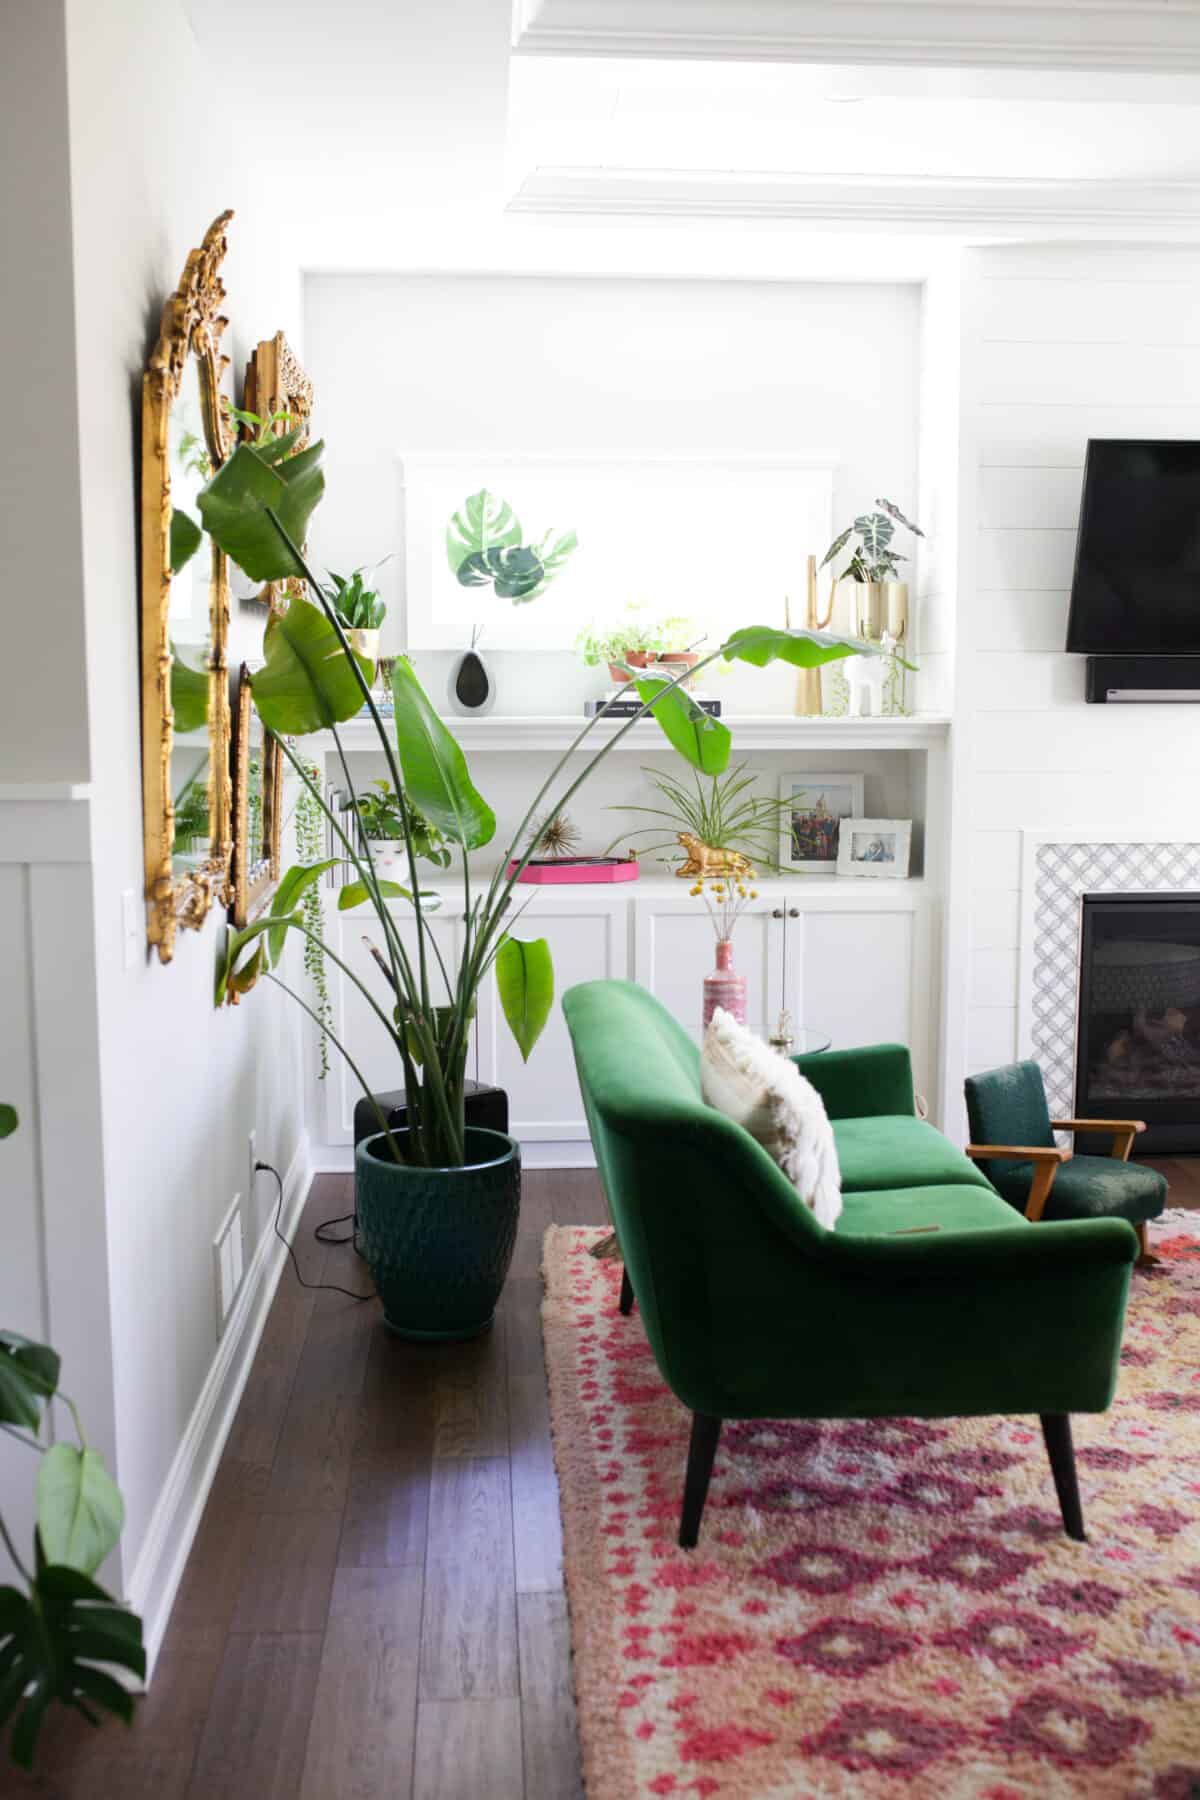 bird of paradise plant behind loveseat in living room